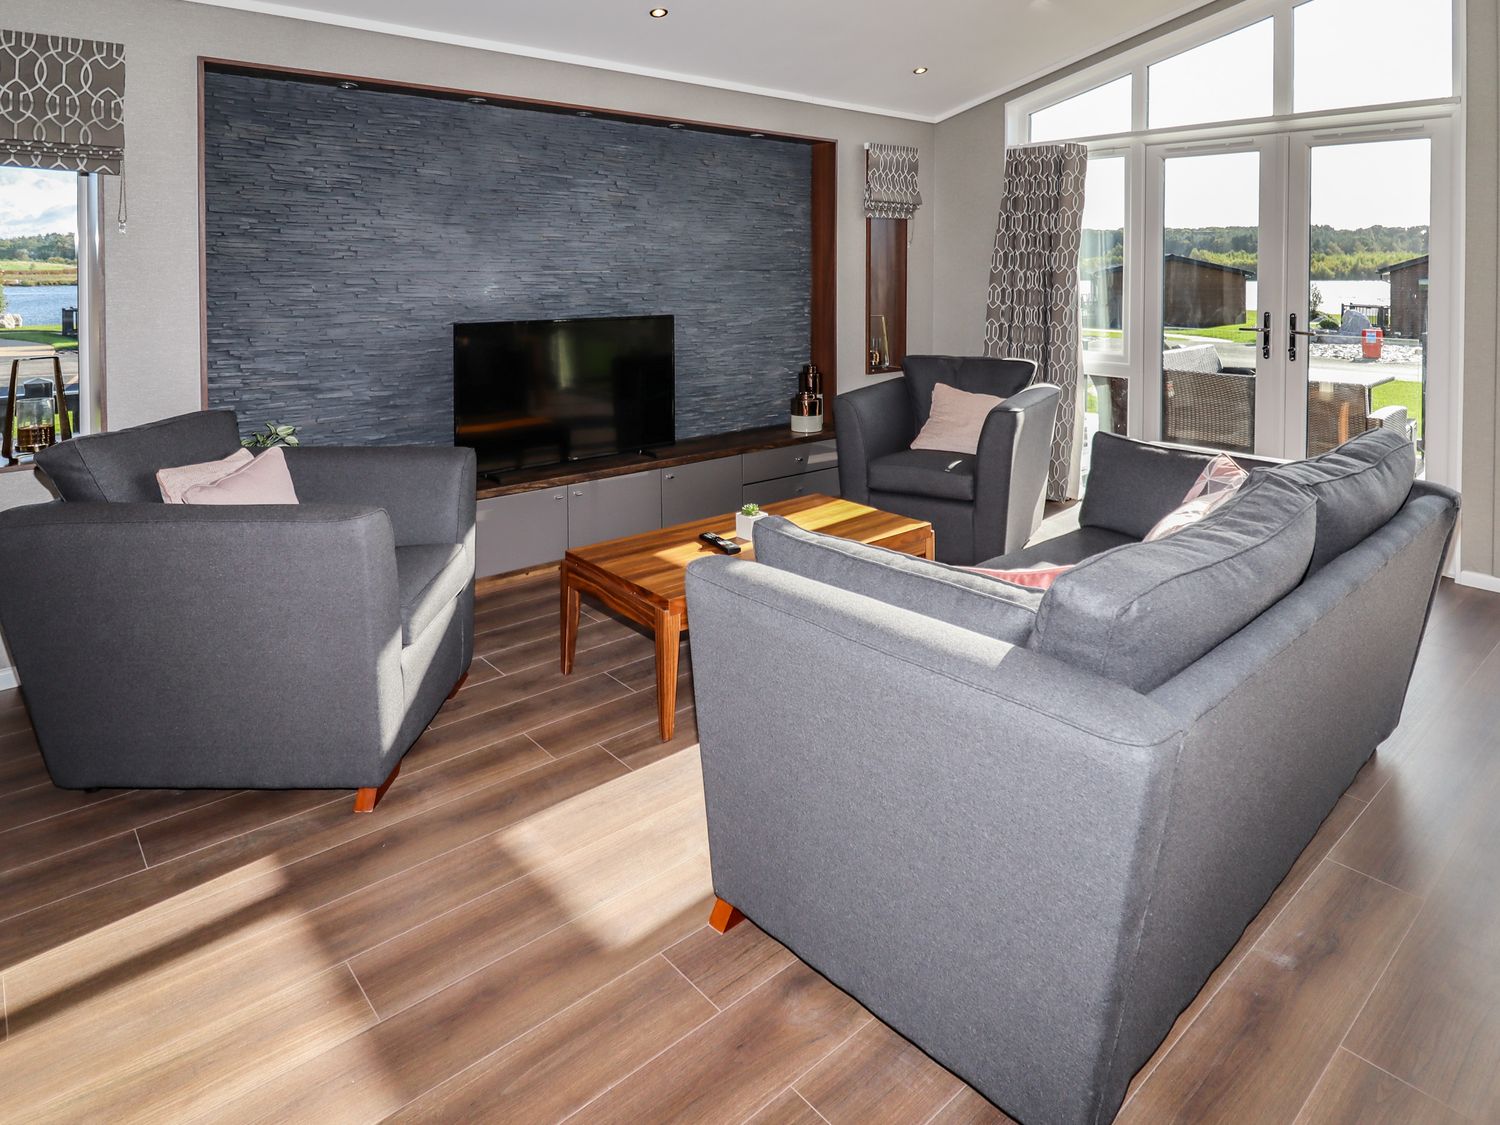 Lodge 28 is in Delamere, Cheshire. Close to amenities and a lake. Ground-floor living. Hot tub. 3bed